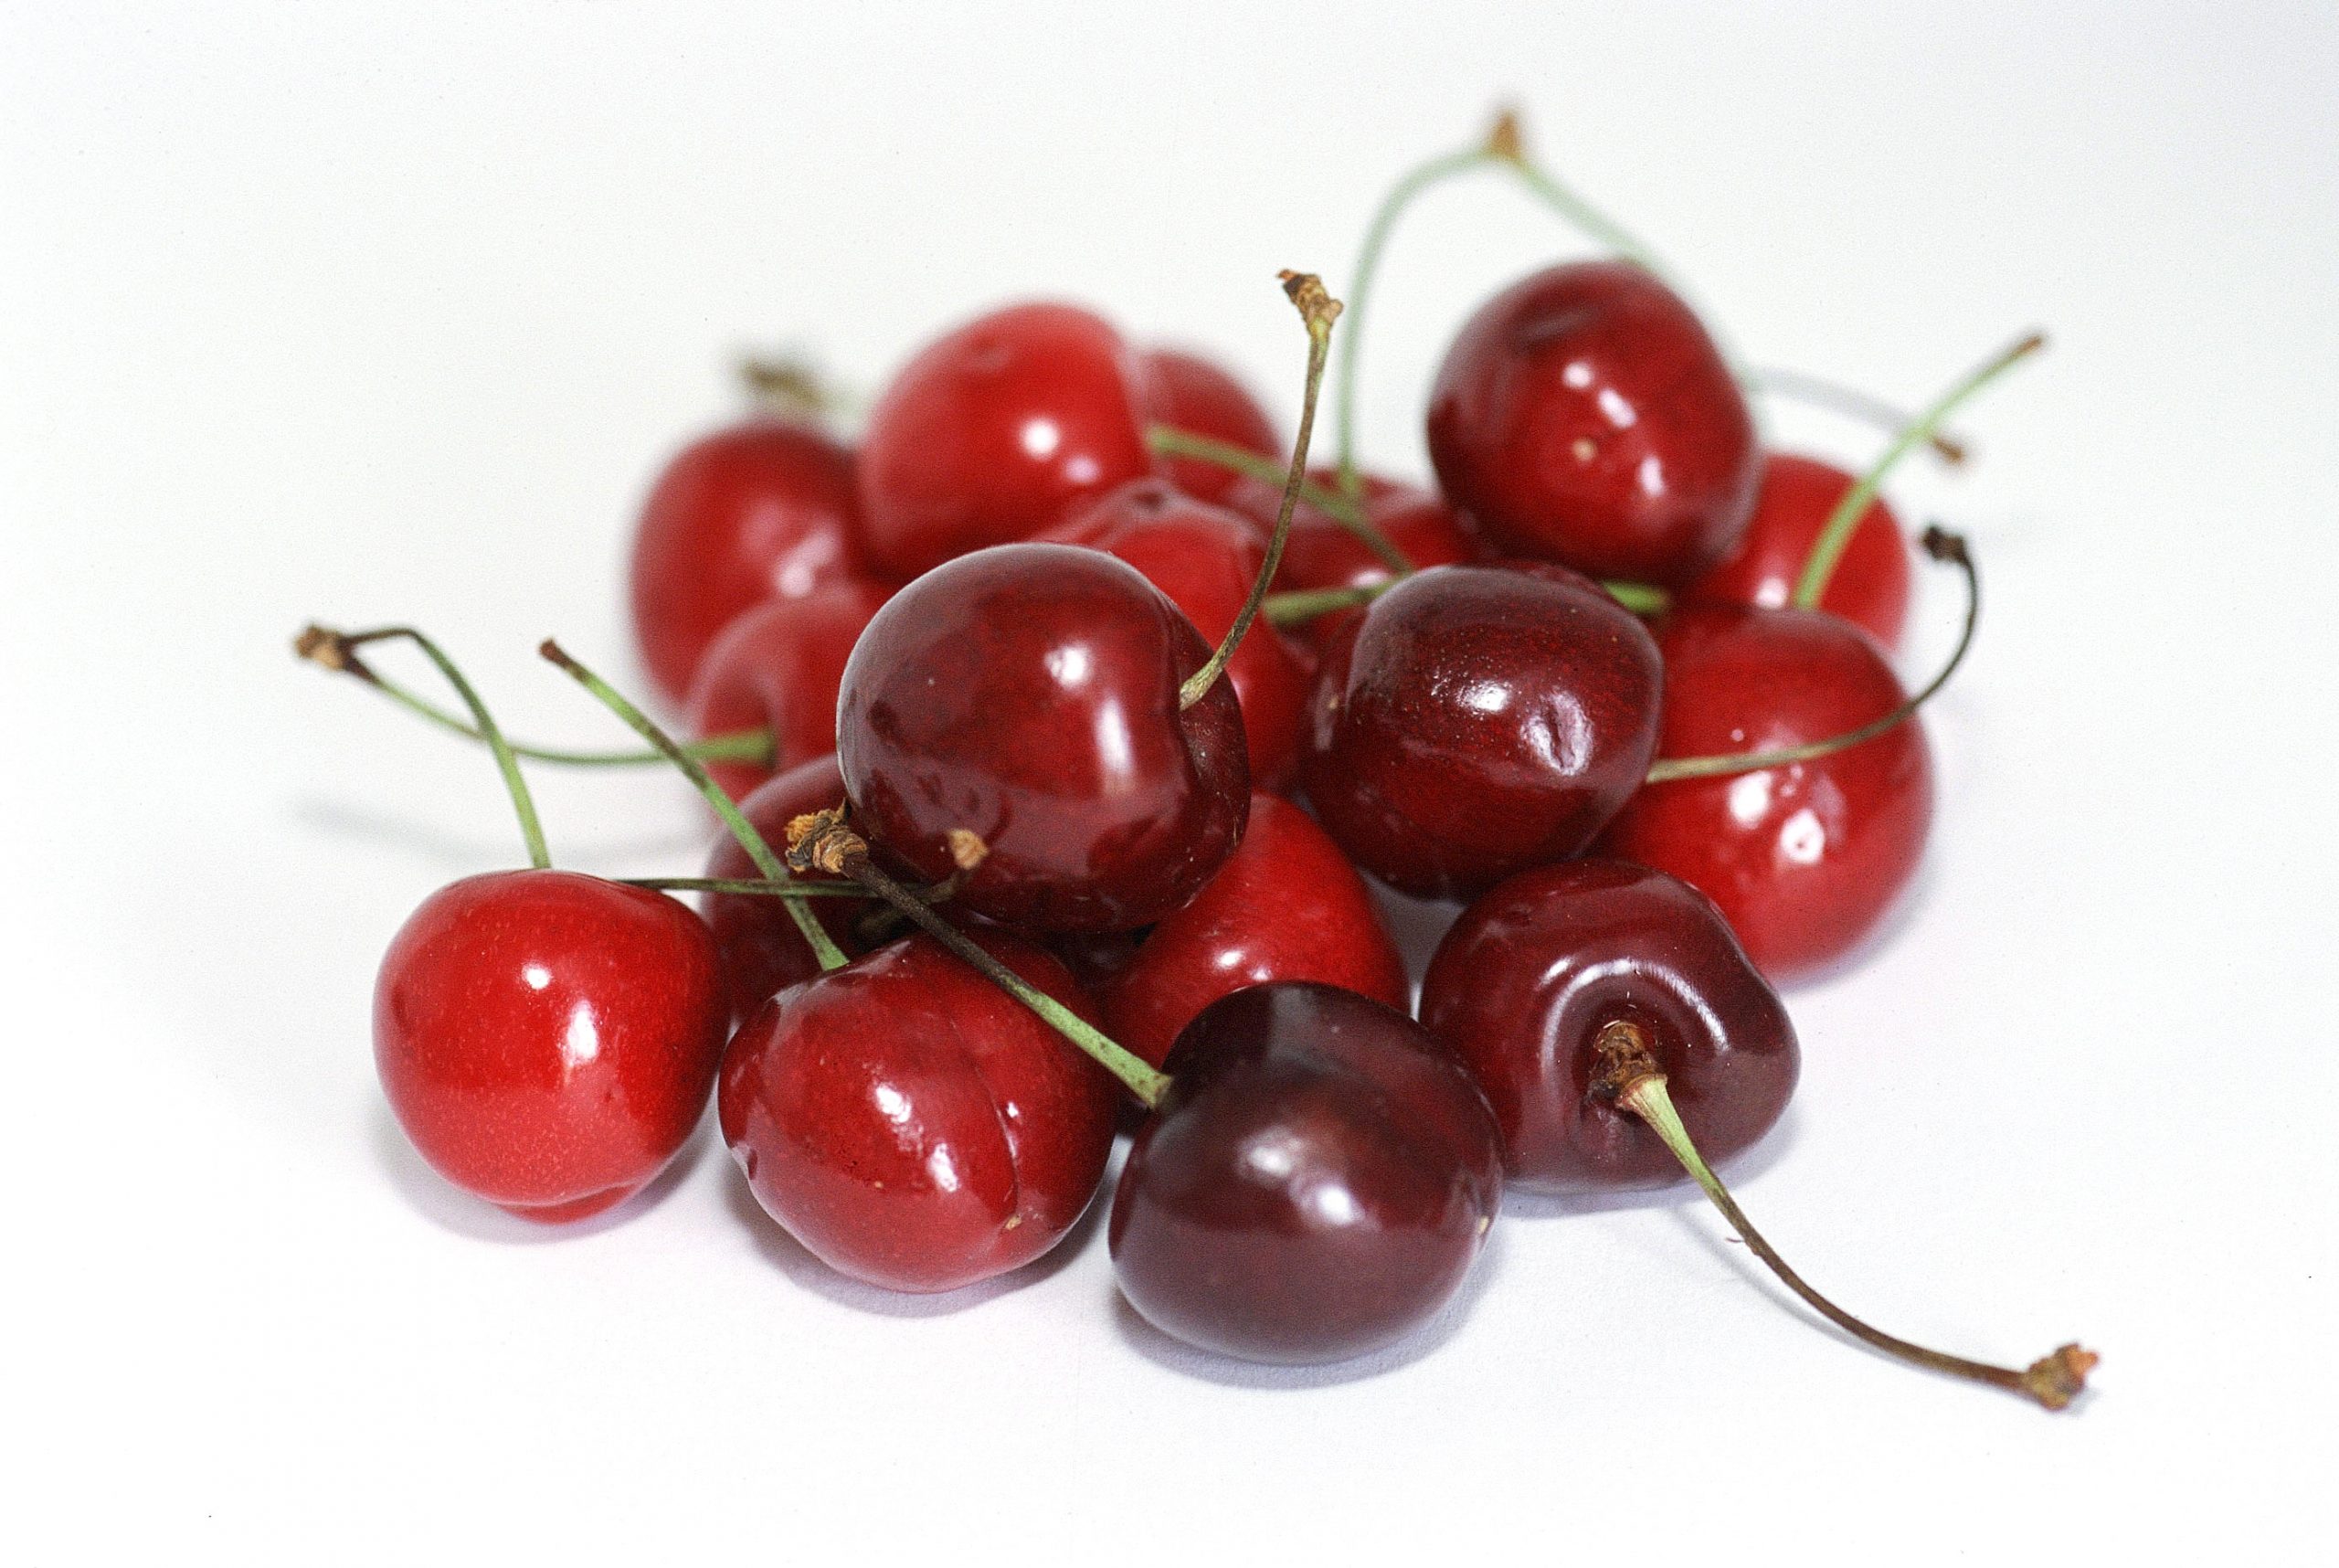 Southern Italy, which accounts for two thirds of national cherry production, is forecast to register a production increase of 30% (especially for early varieties), thanks to ideal weather conditions during fruit set.